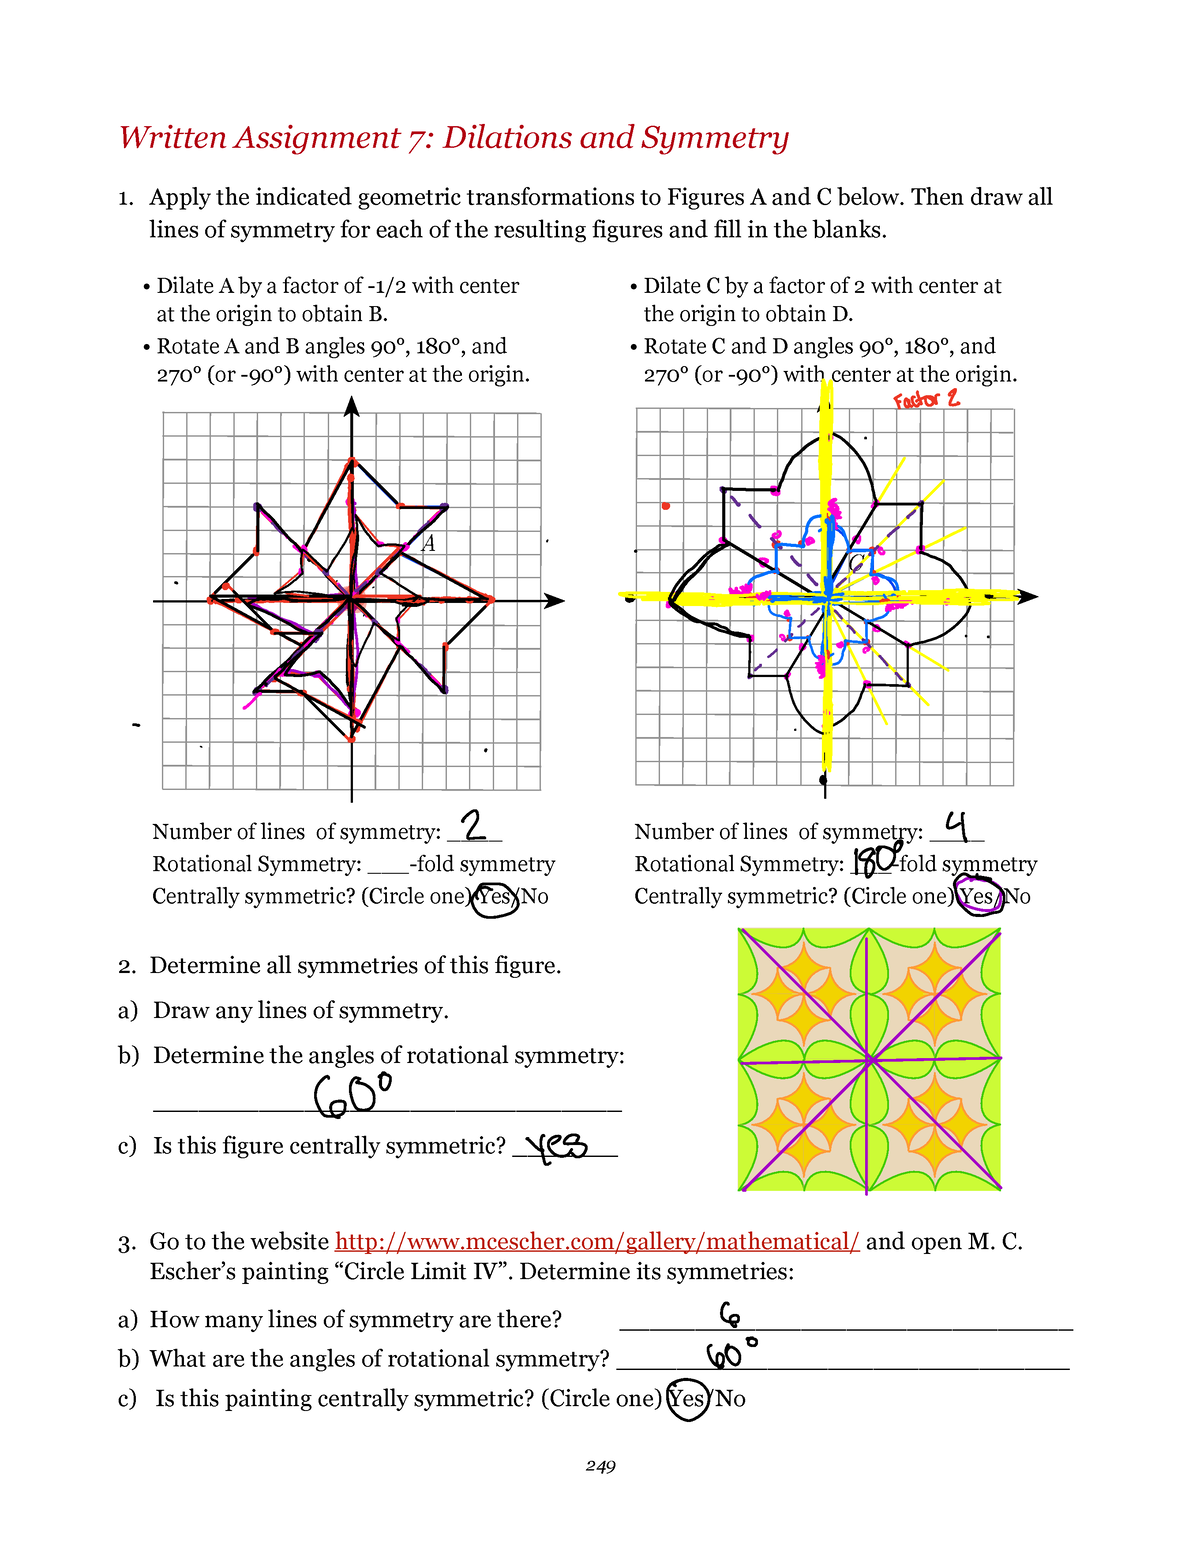 written assignment 7 dilations and symmetry answer key